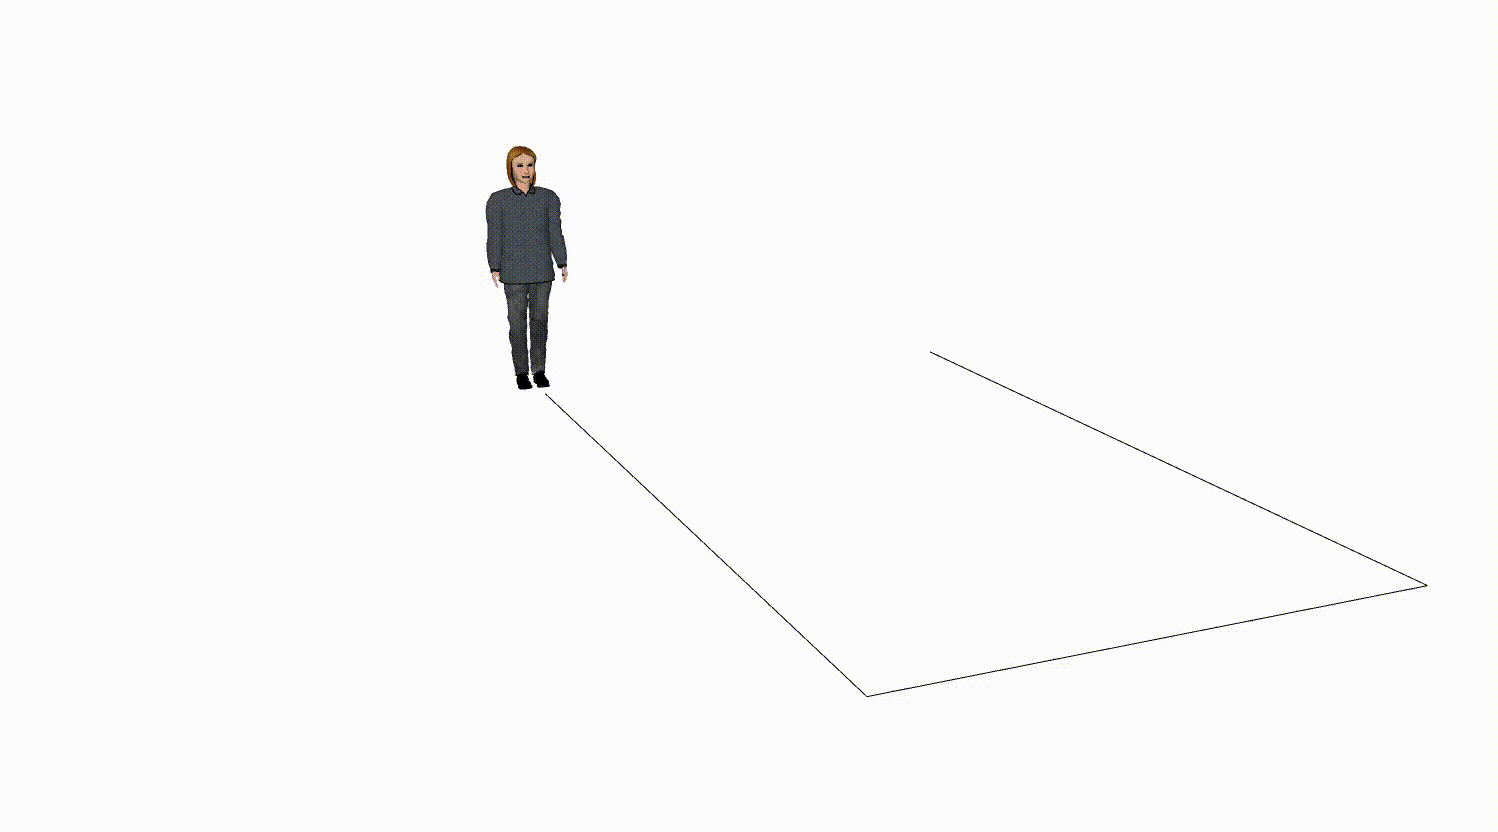 Walking man with acceptable movements